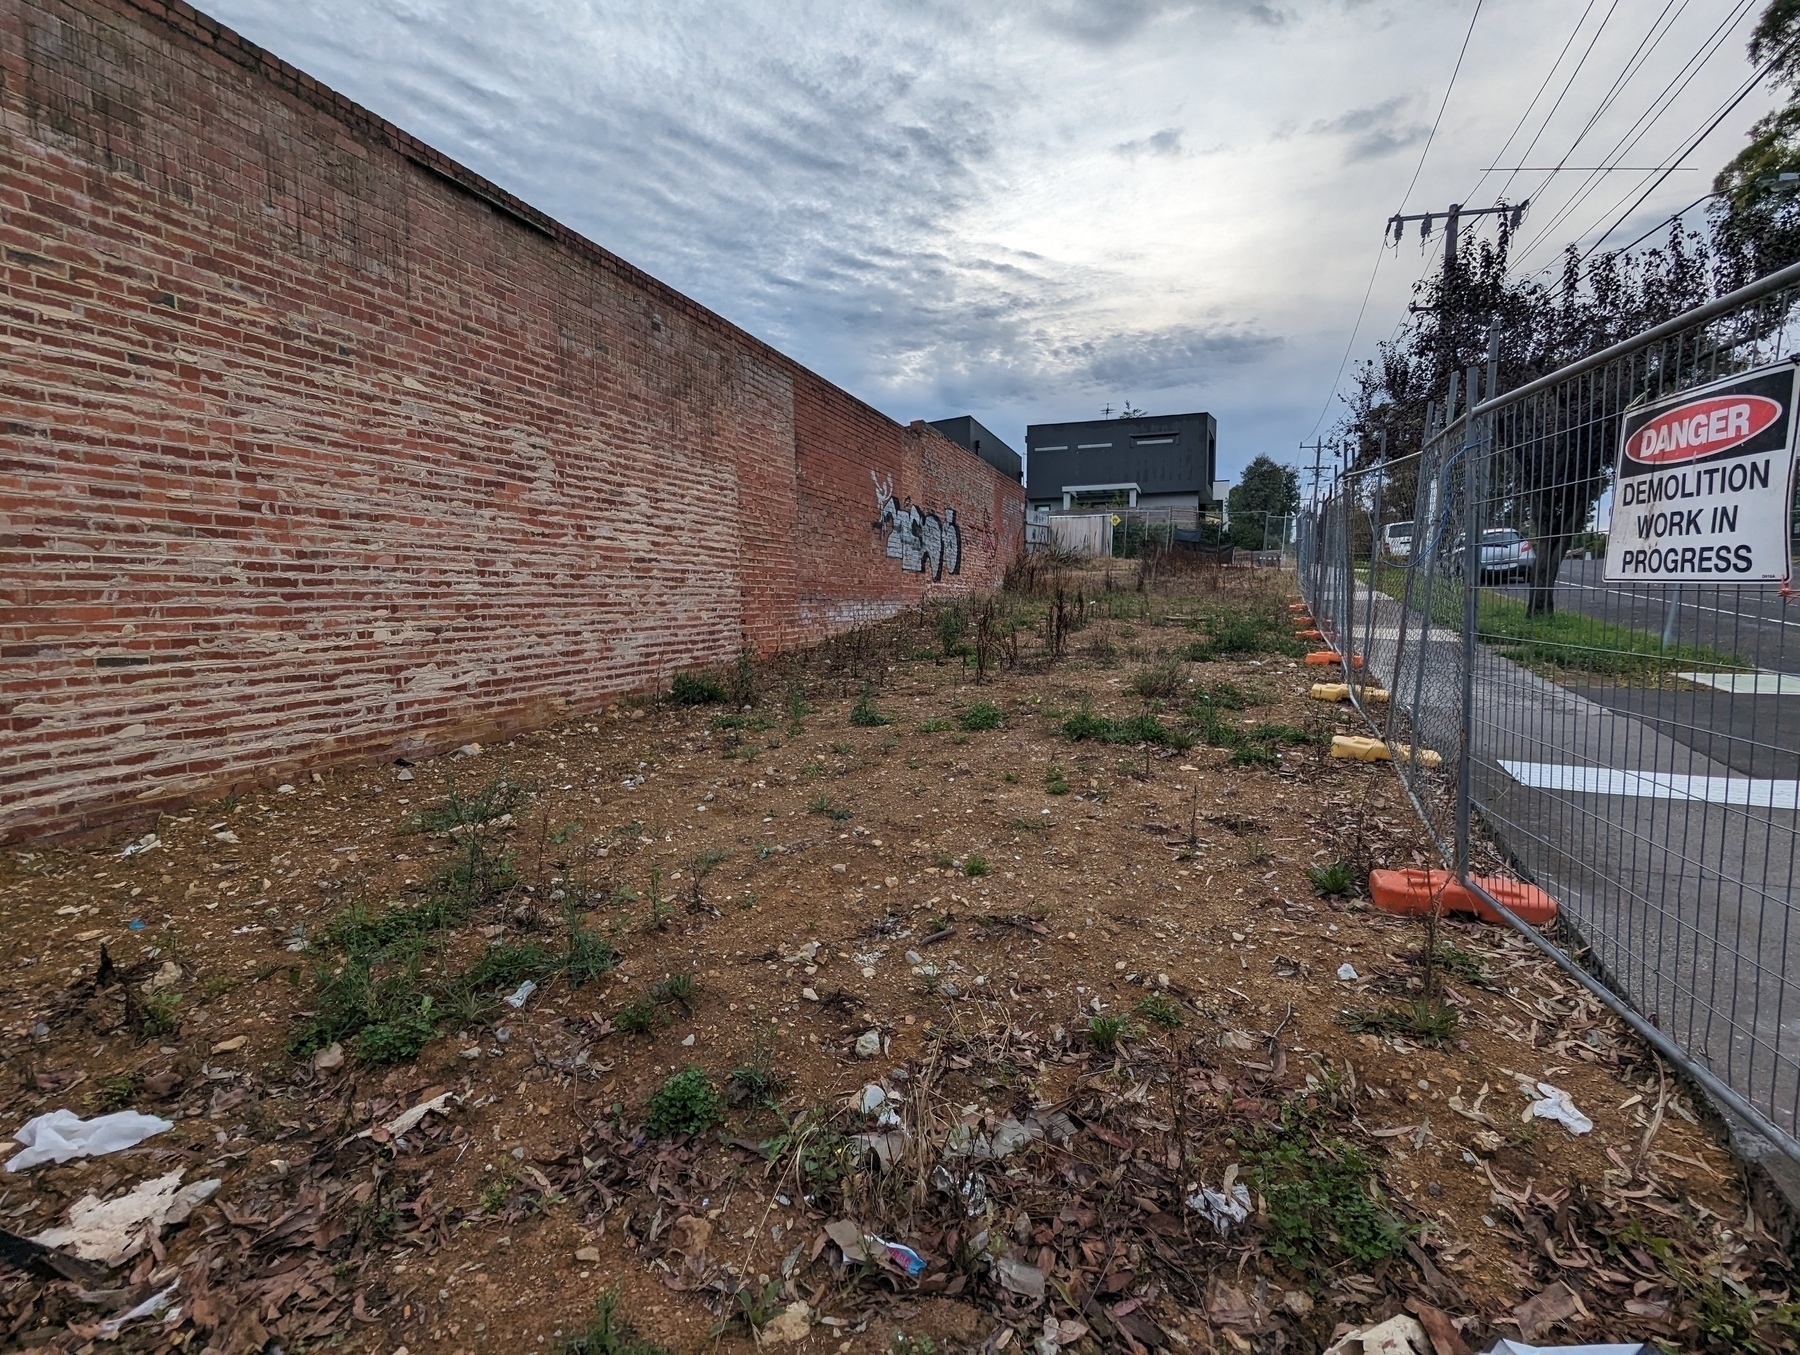 Vacant lot, beside a brick wall and road, where once a building stood.